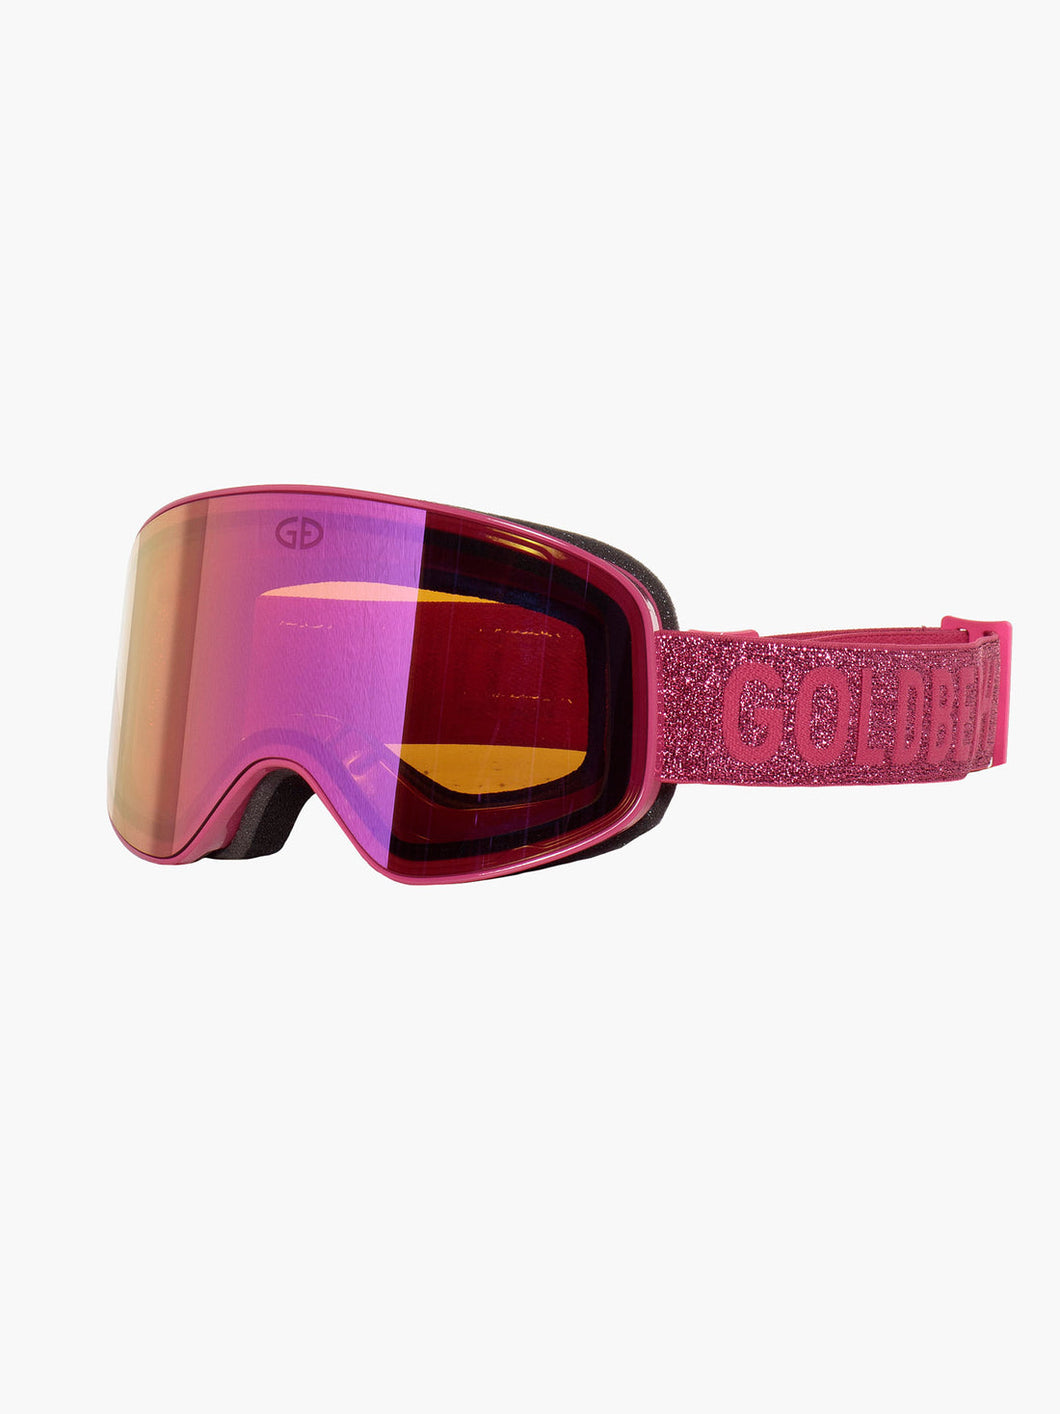 Headturner Goggle  - Passion Pink